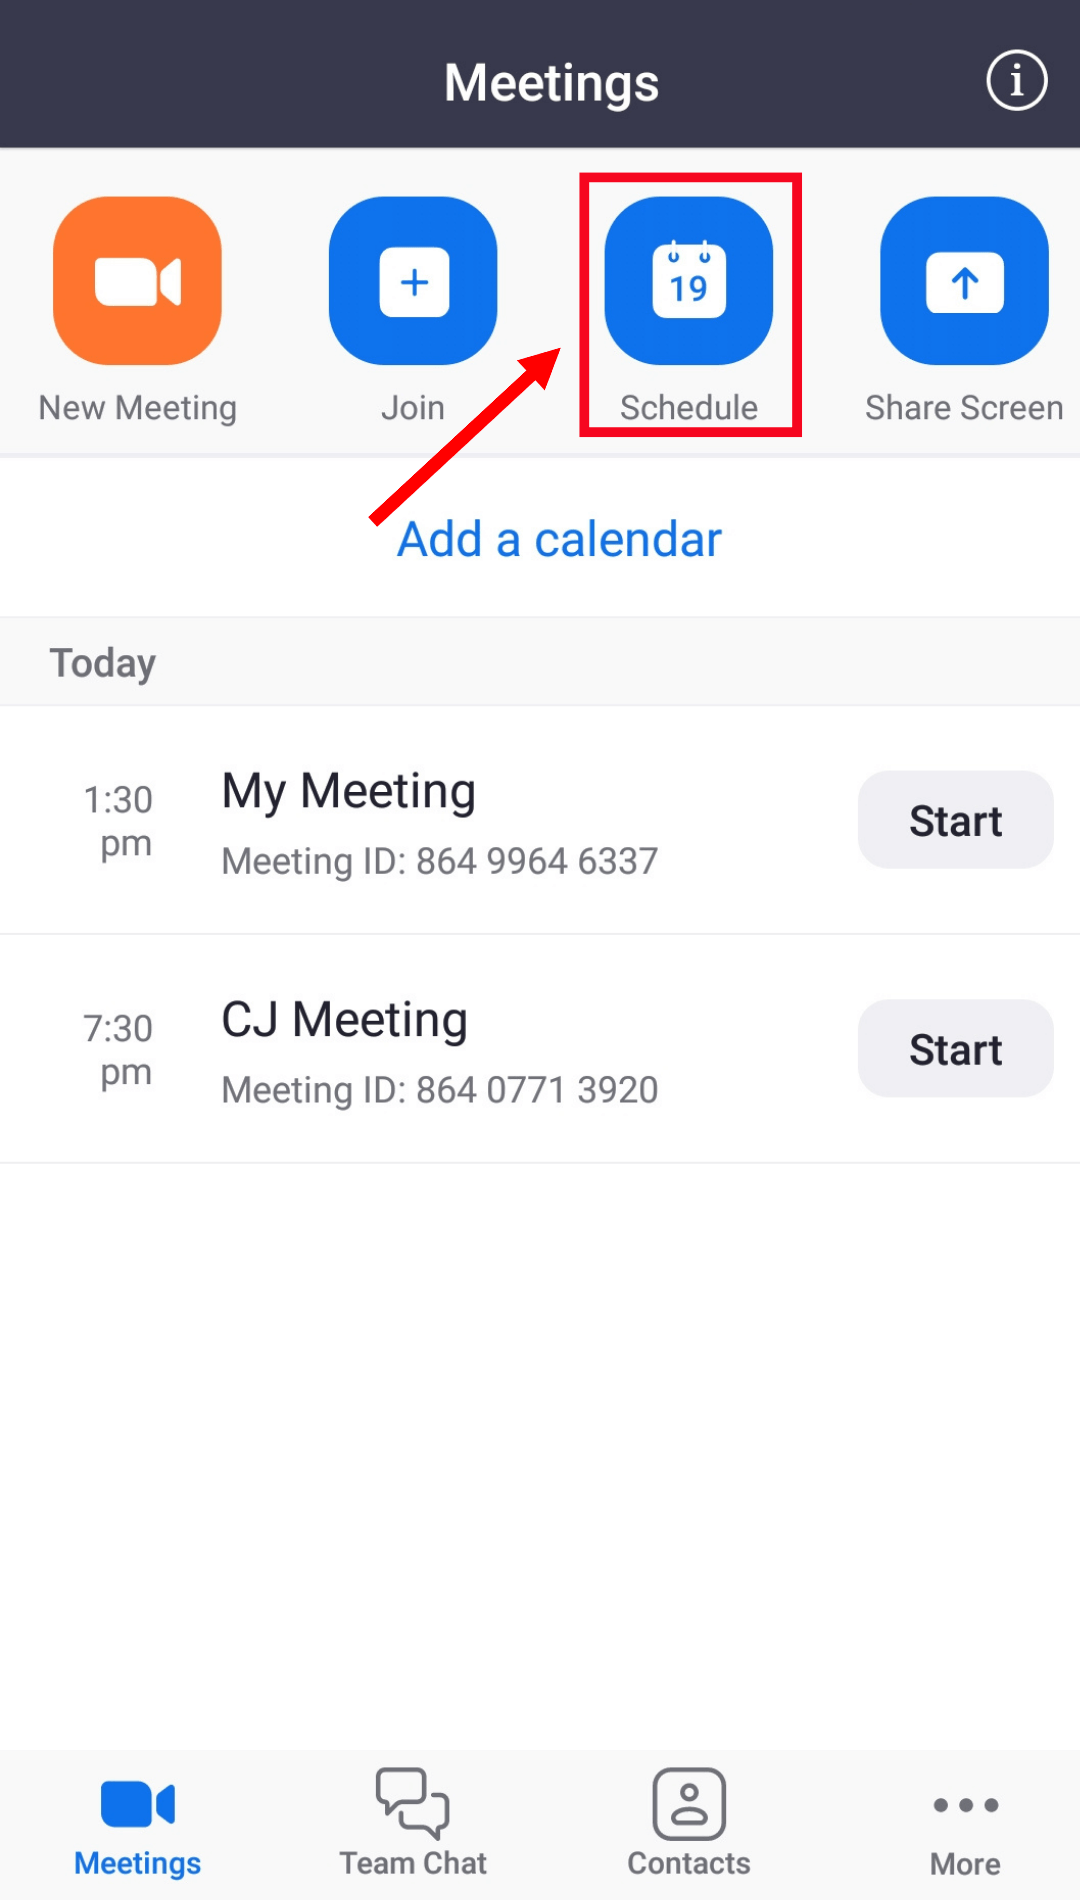 click schedule to create meeting for later